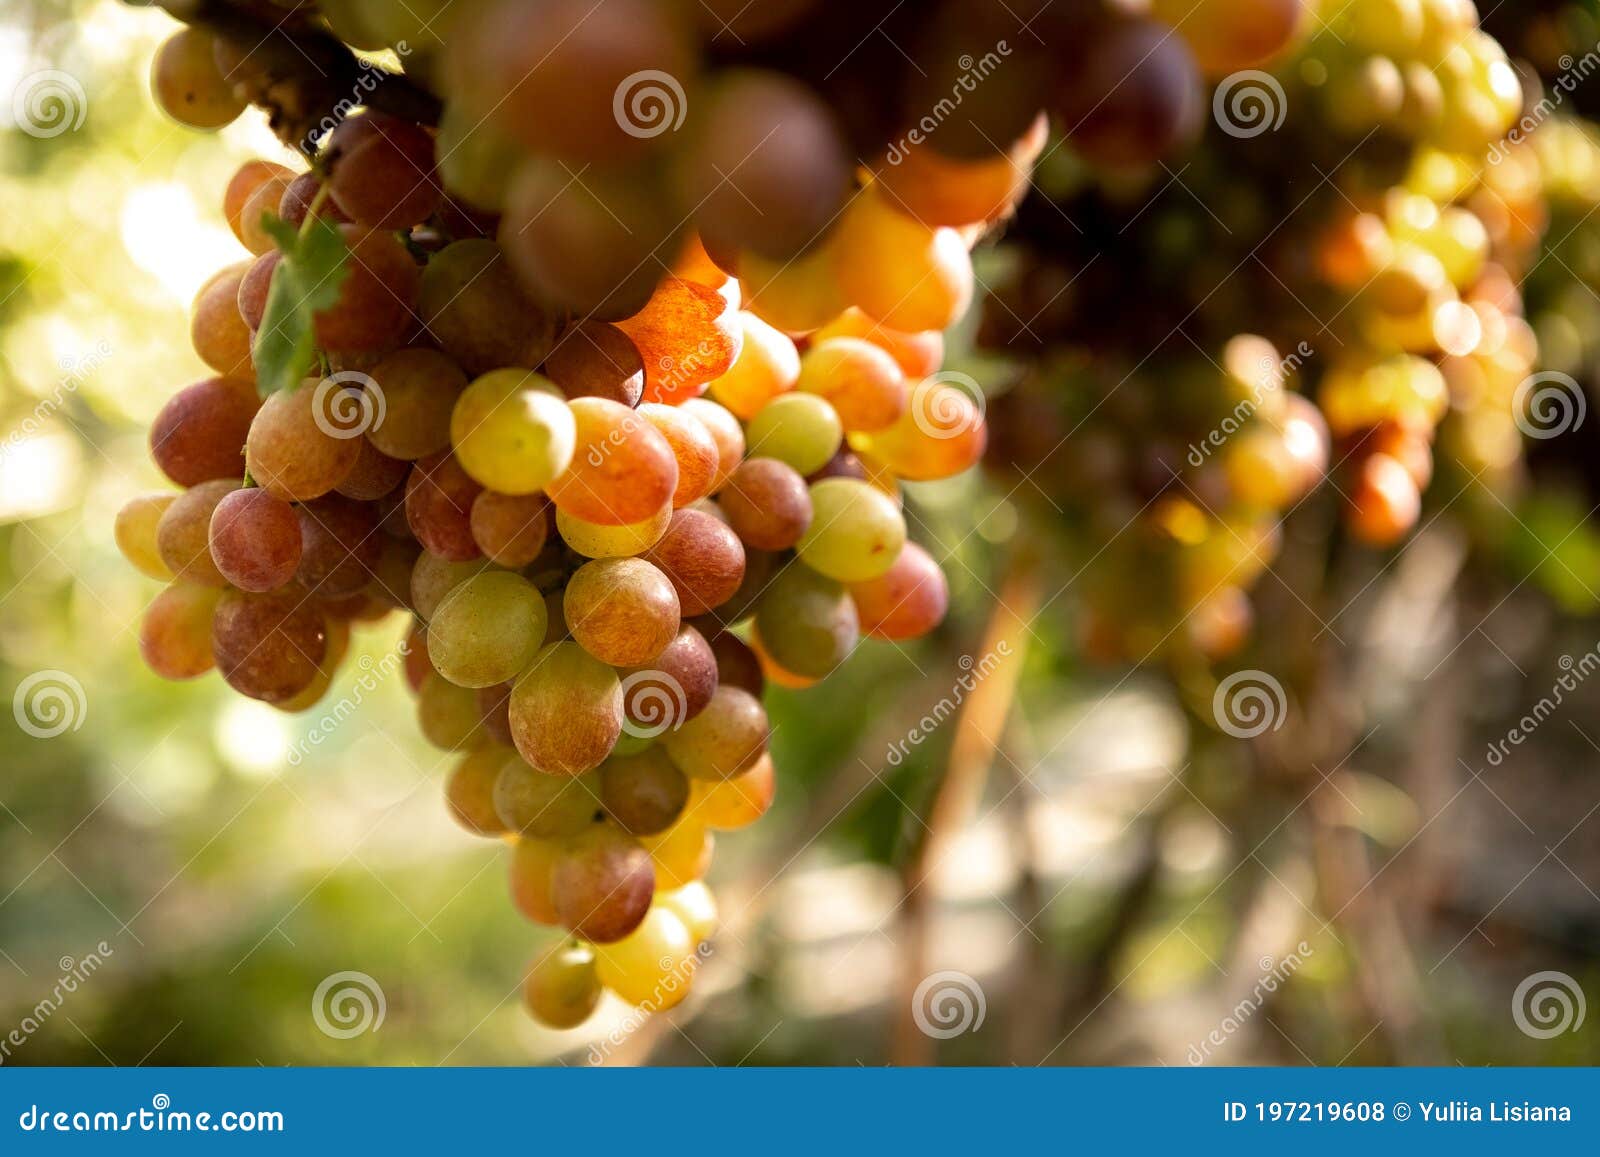 large bunche of red wine grapes hang from a vine. ripe grapas